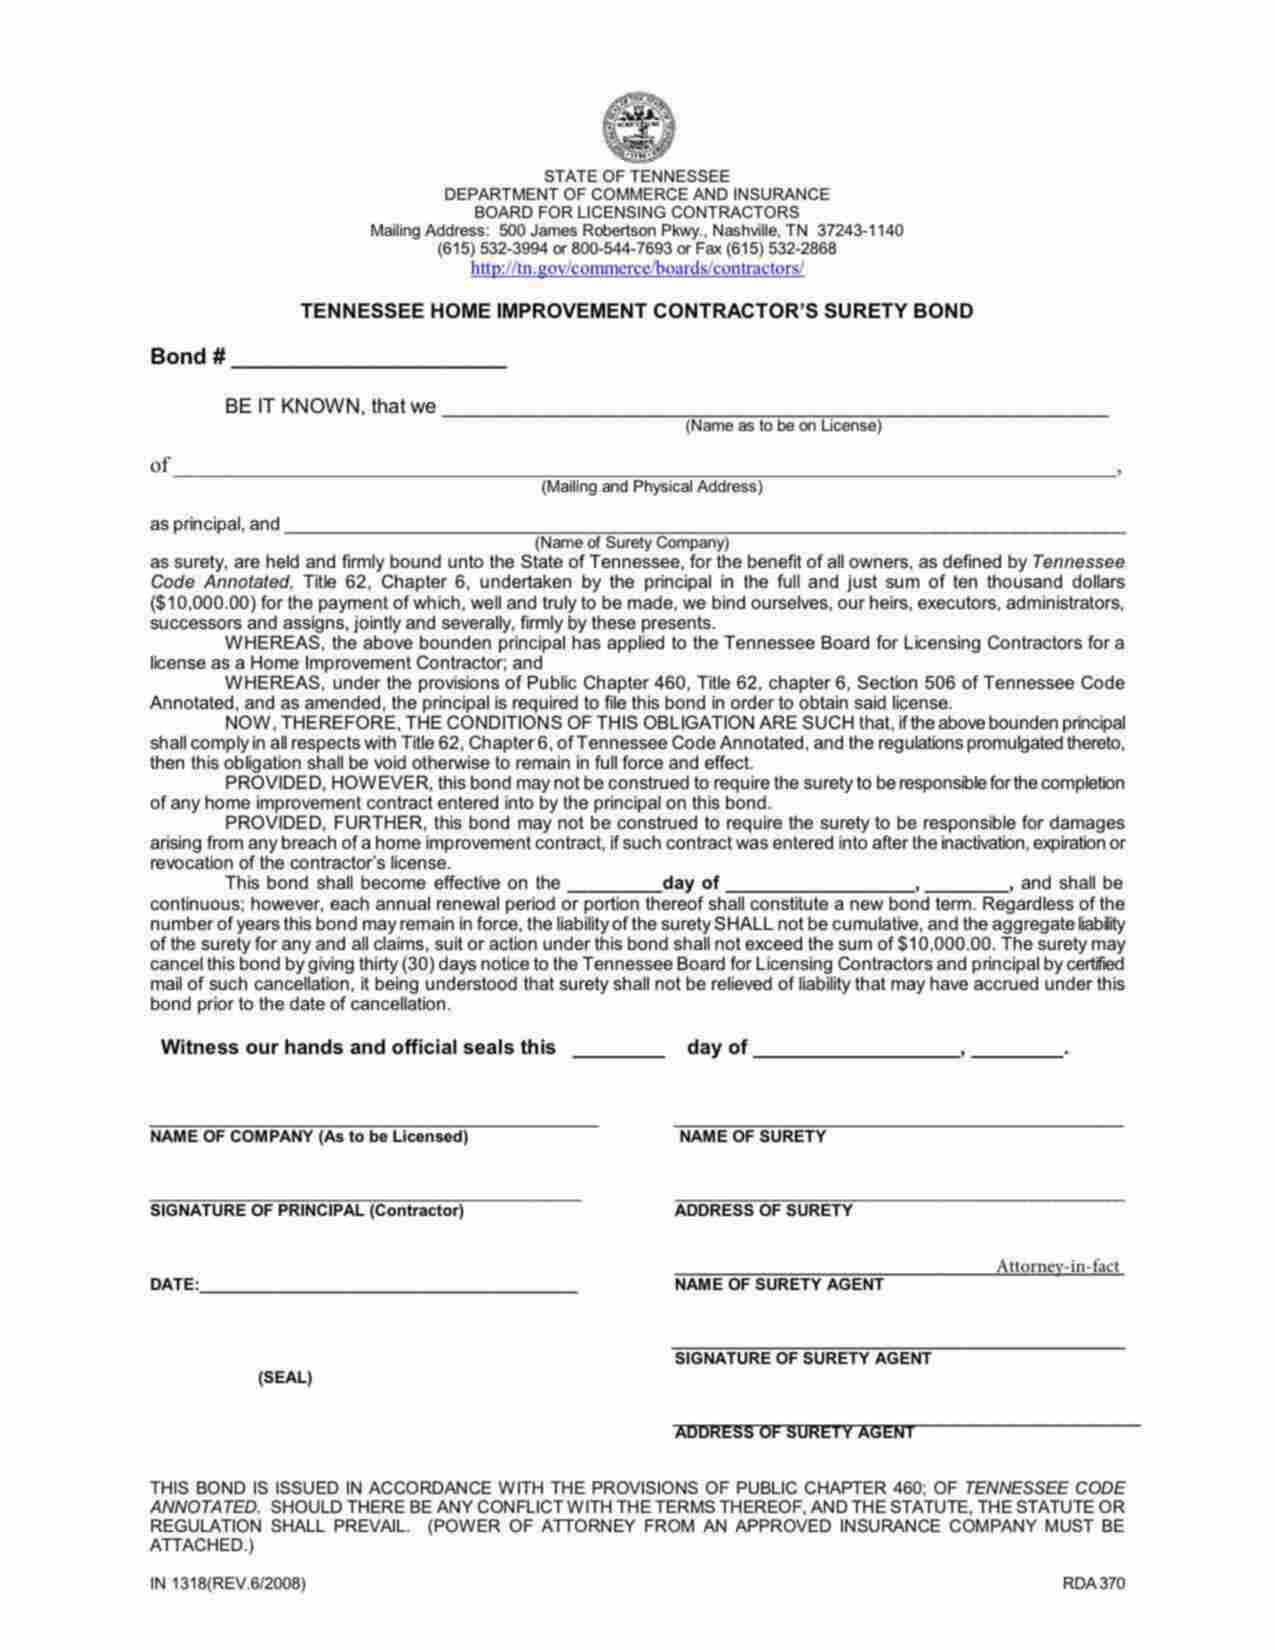 Tennessee Home Improvement Contractor Bond Form